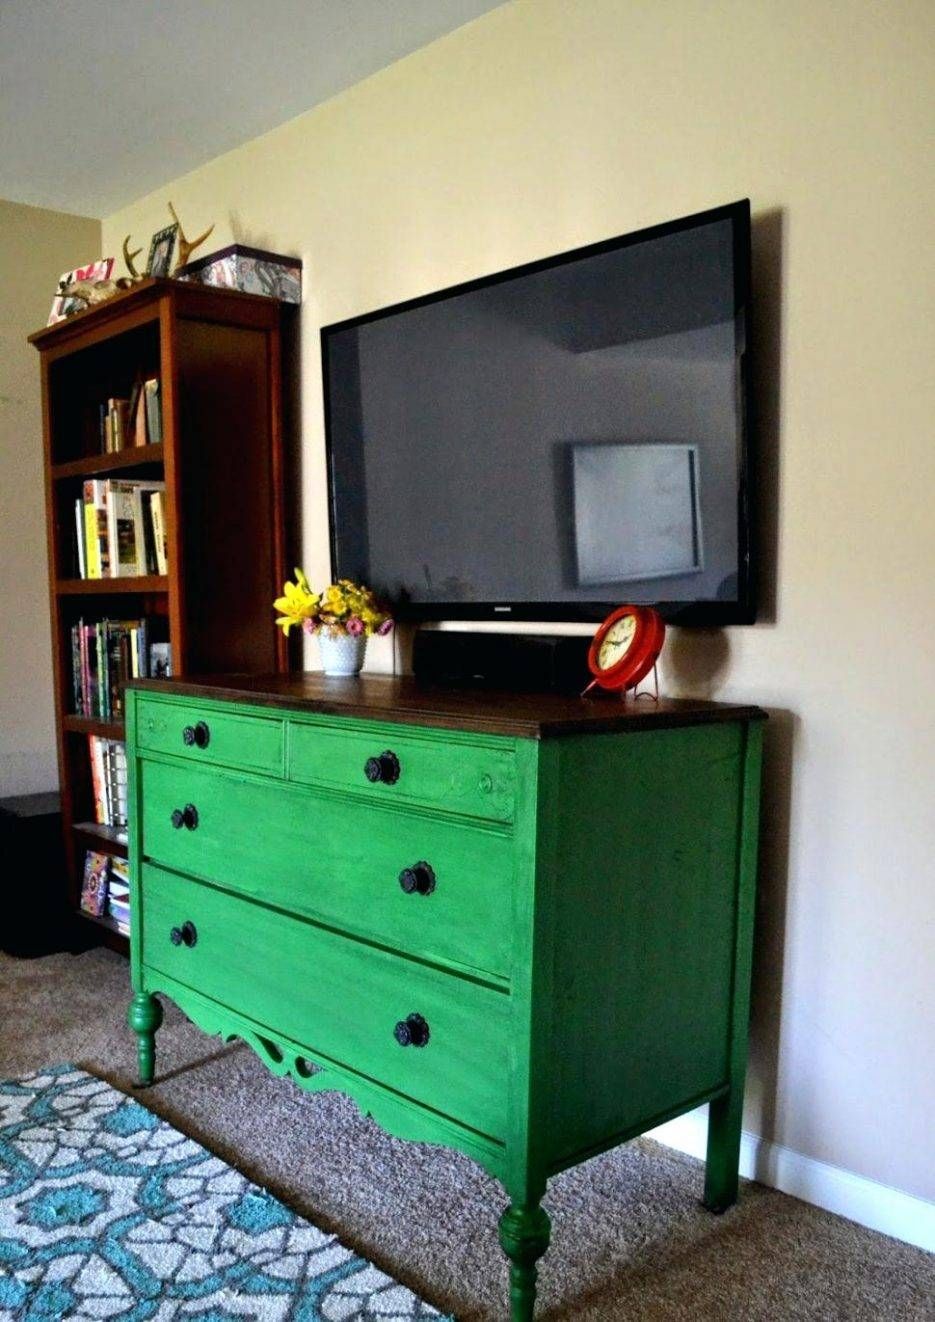 Tv Stand : Appealing Large Size Of Tv Standsgreen Tvtandtaggering In Green Tv Stands (View 4 of 15)